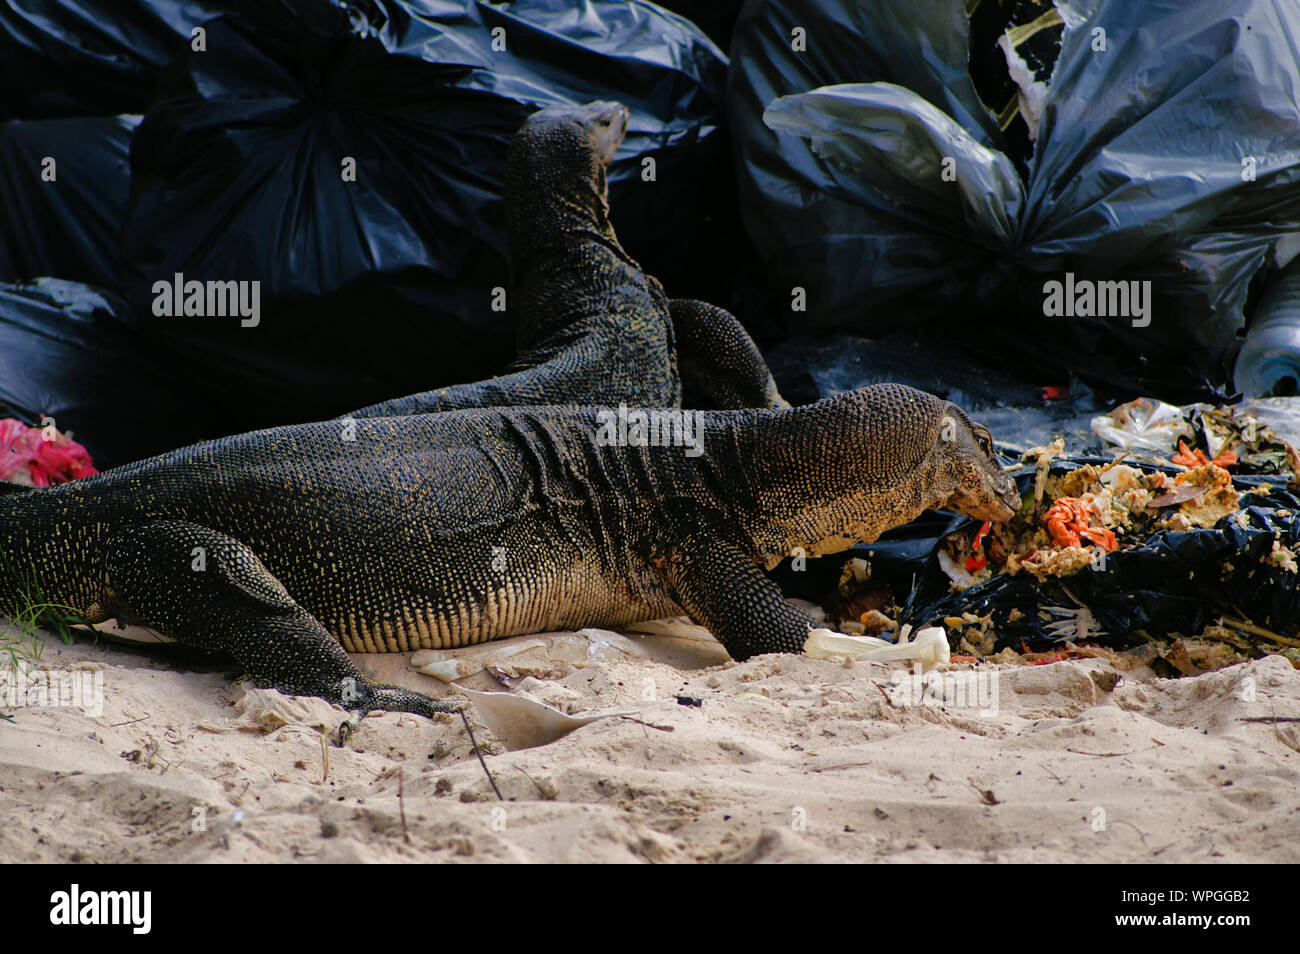 Huge 2 Meters Reptiles Varans Are Eating Garbage/discarded Food From Restaurant. Stock Photo